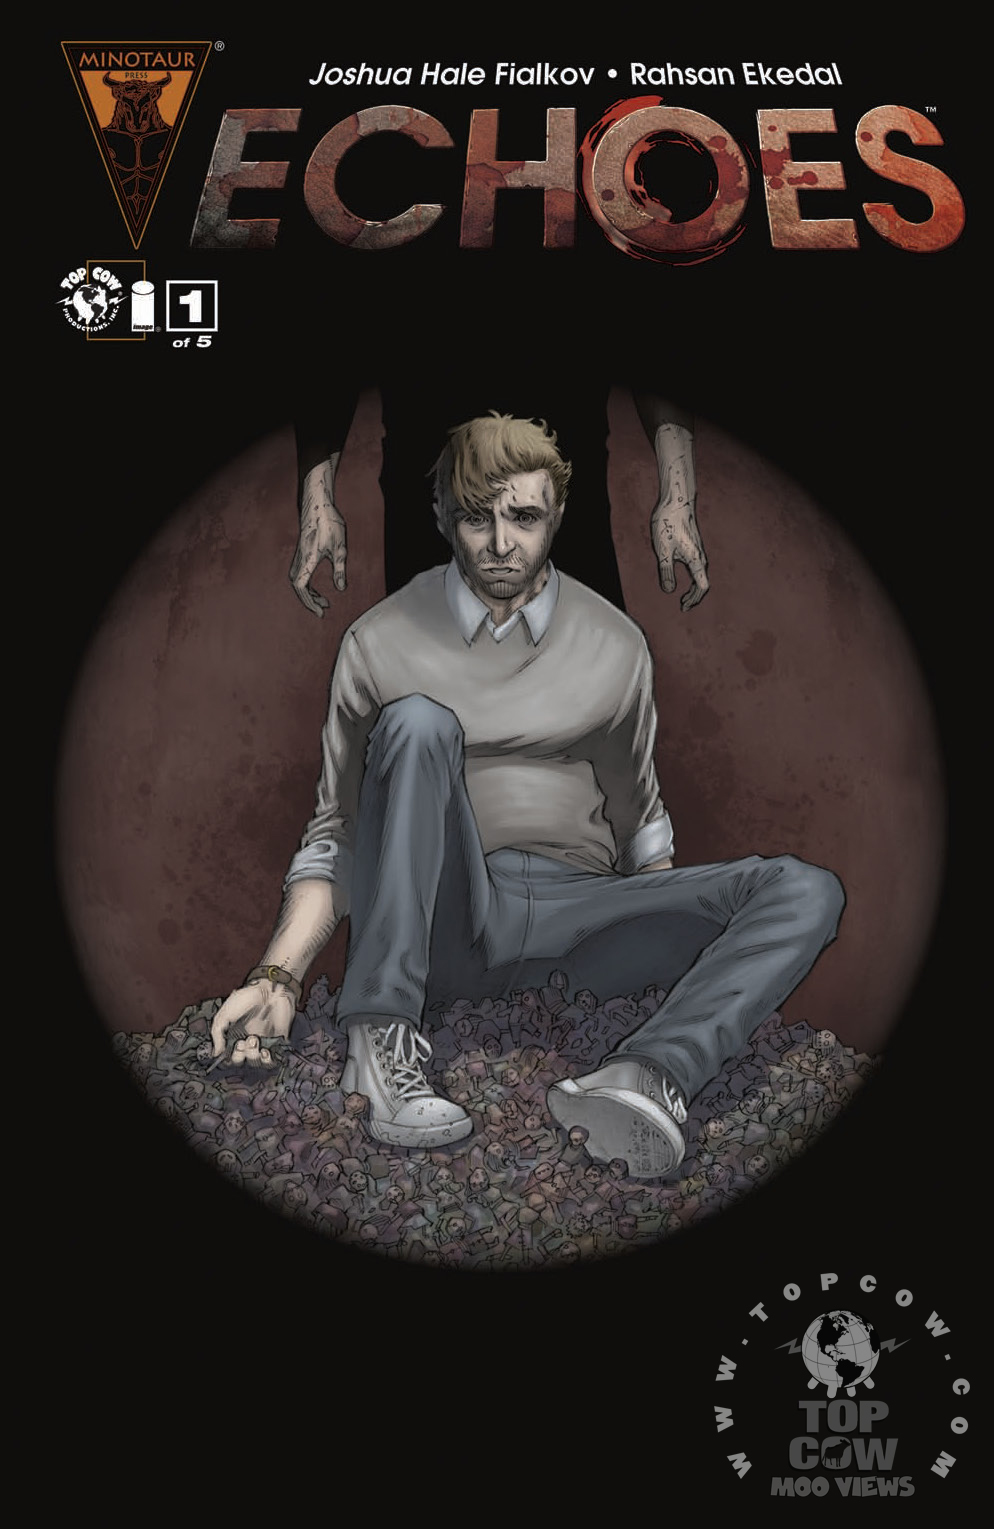 Echoes # 1 Cover A